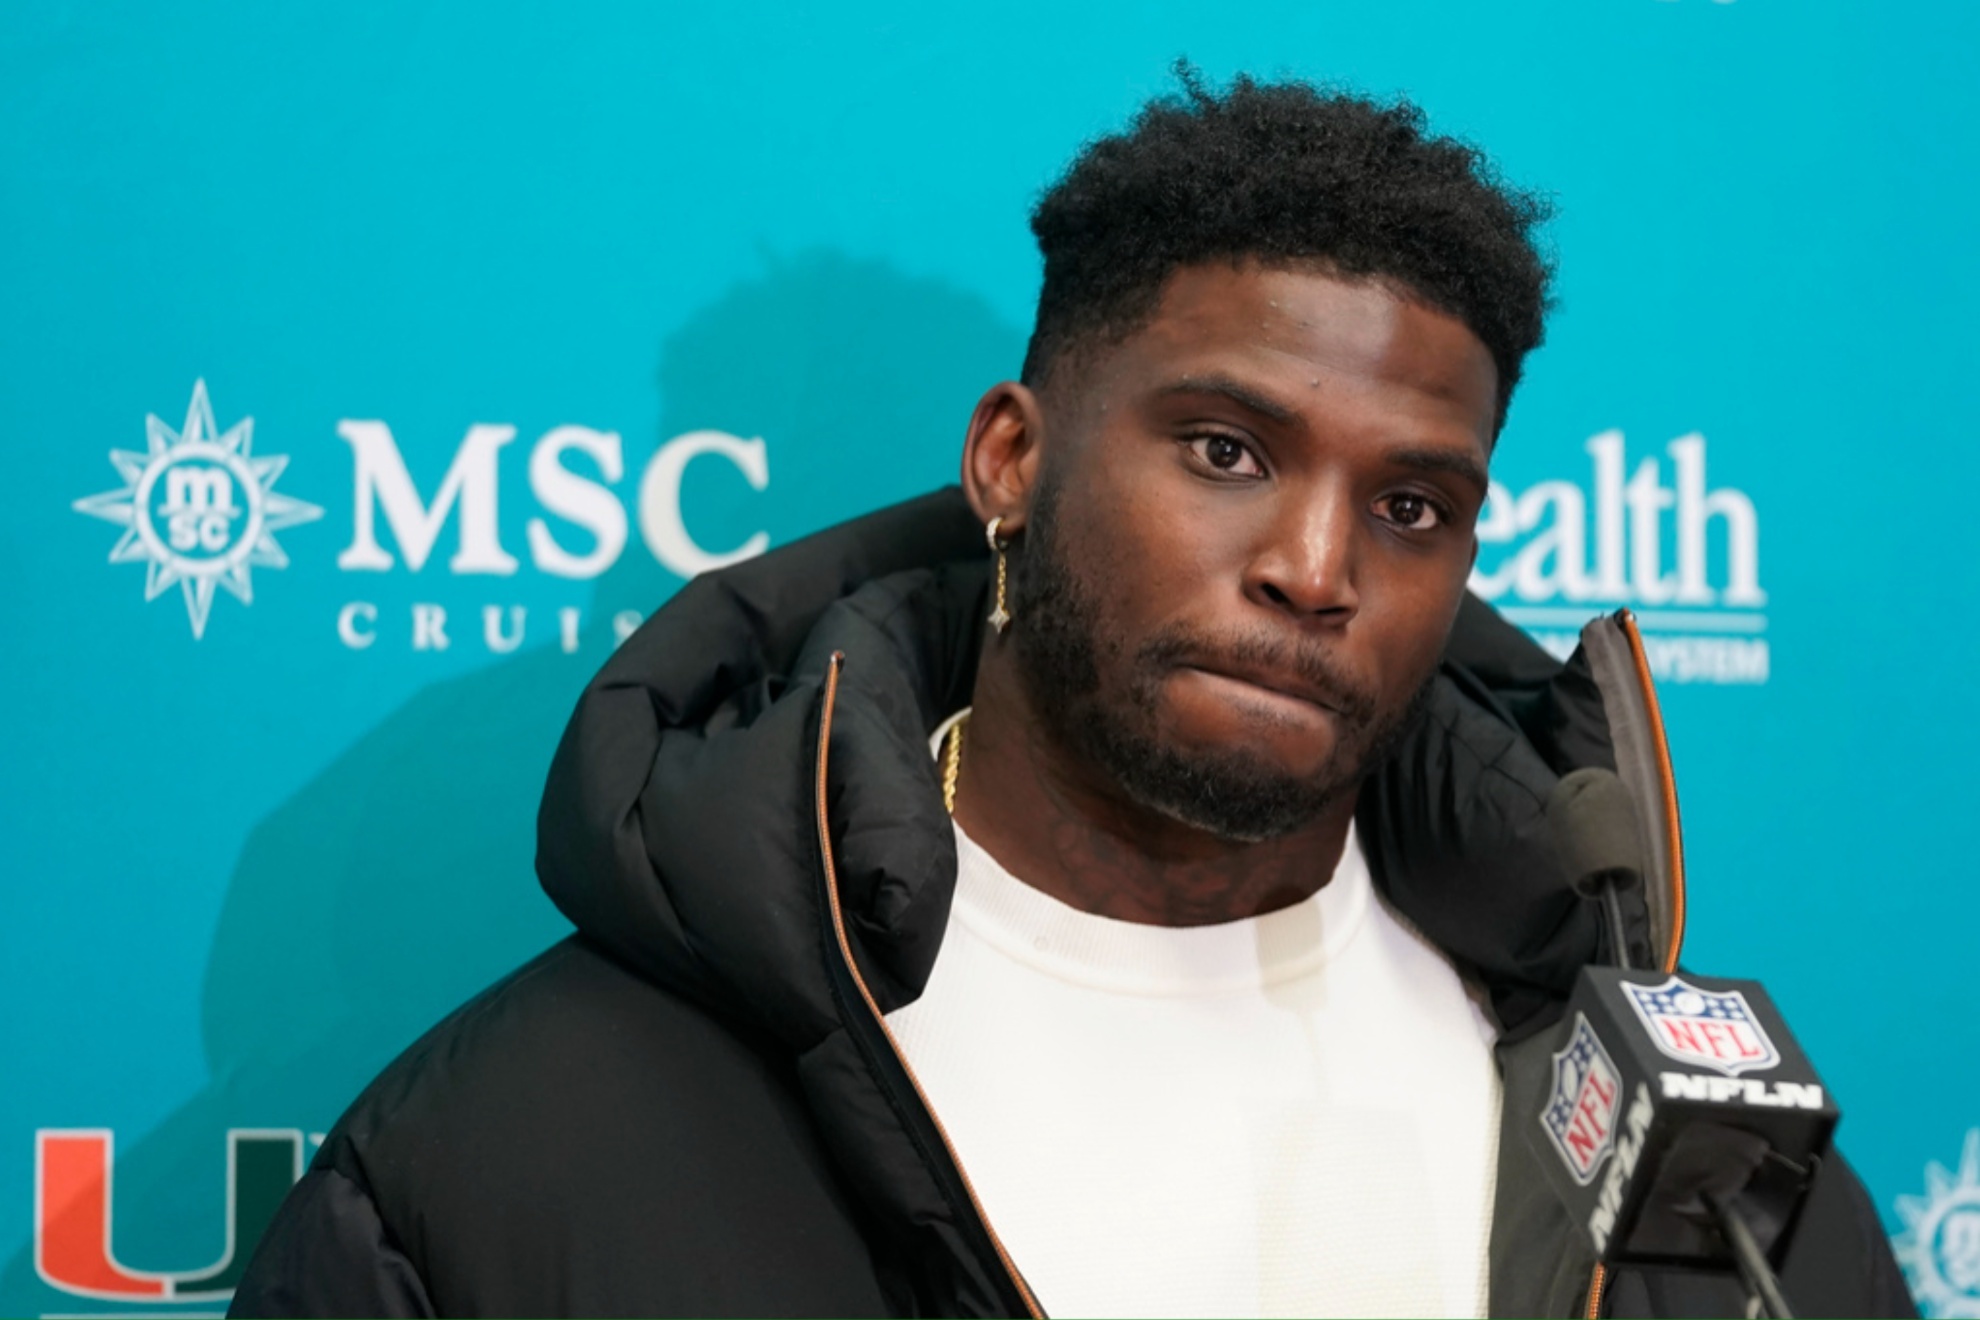 Tyreek Hill spoke to the media after the Miami Dolphins Wild Card loss to the Kansas City Chiefs